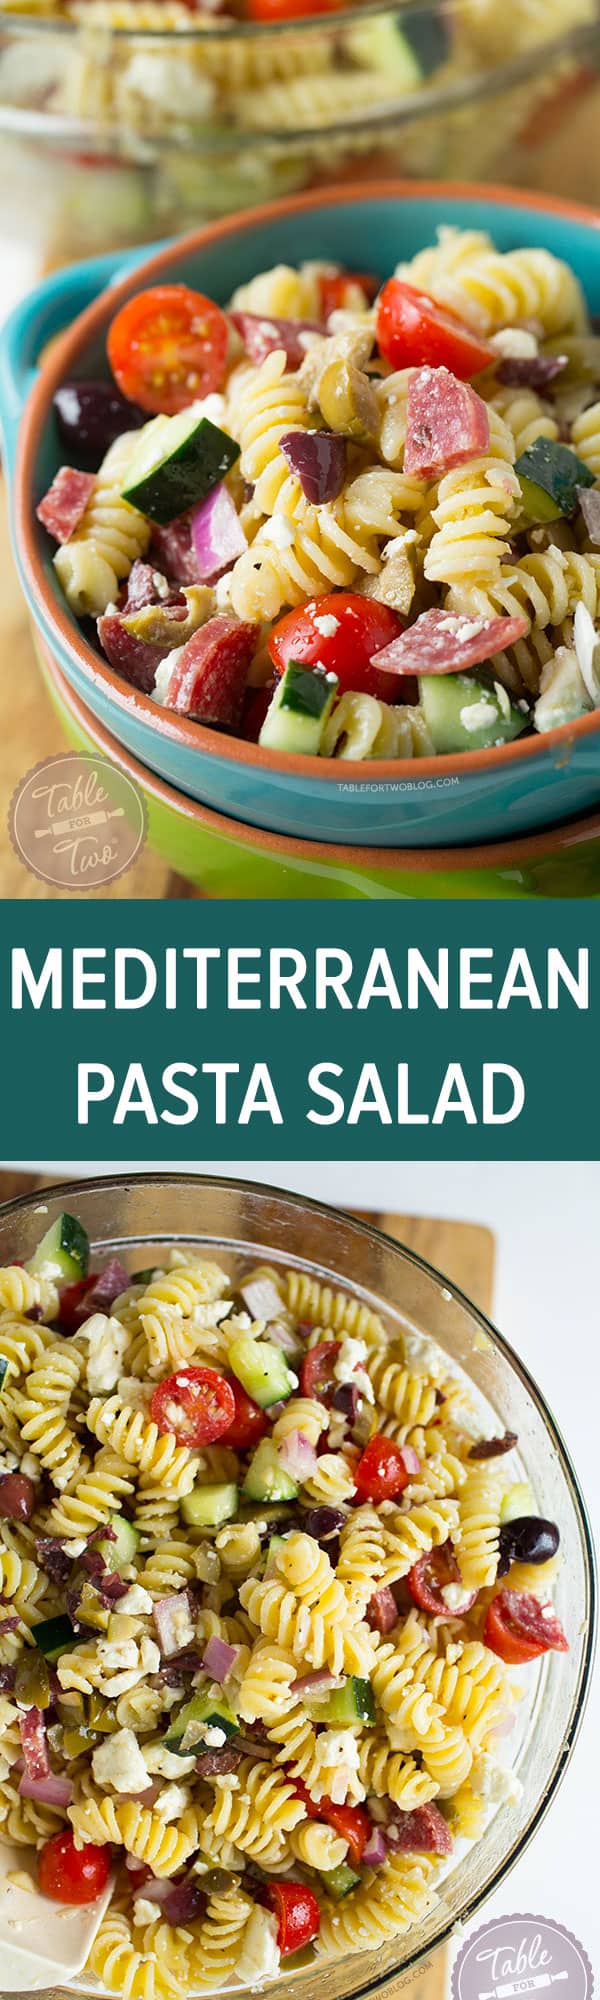 This chilled Mediterranean pasta salad comes together in no time! Perfect for warm days and parties!